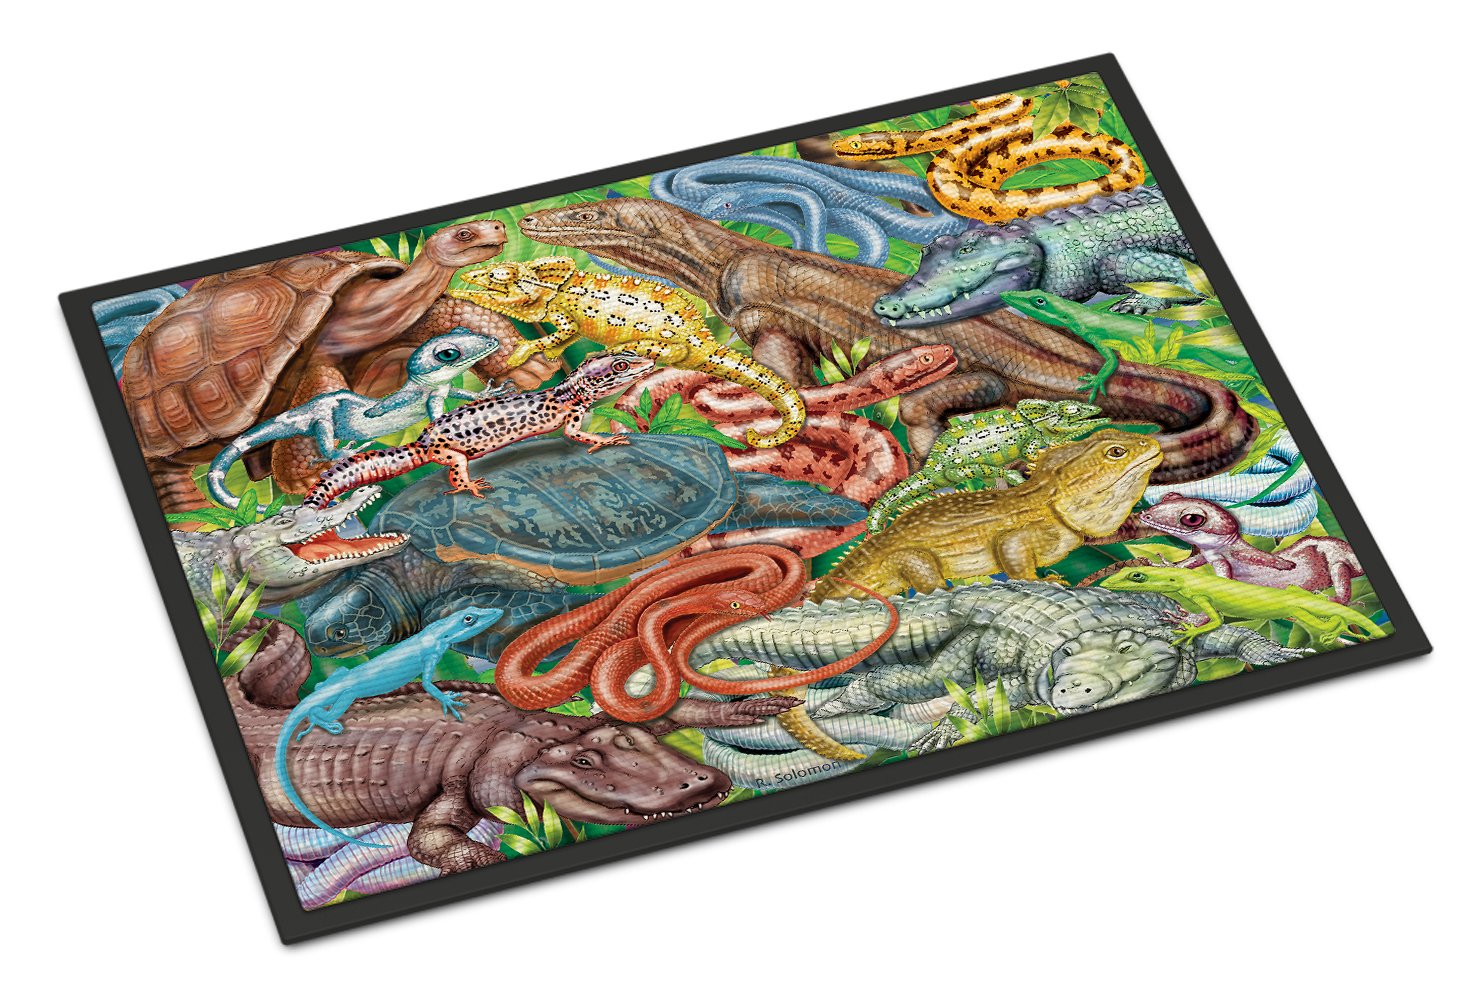 Scales and Tails, Snakes, Turtle, Reptiles Indoor or Outdoor Mat 24x36 PRS4034JMAT by Caroline's Treasures